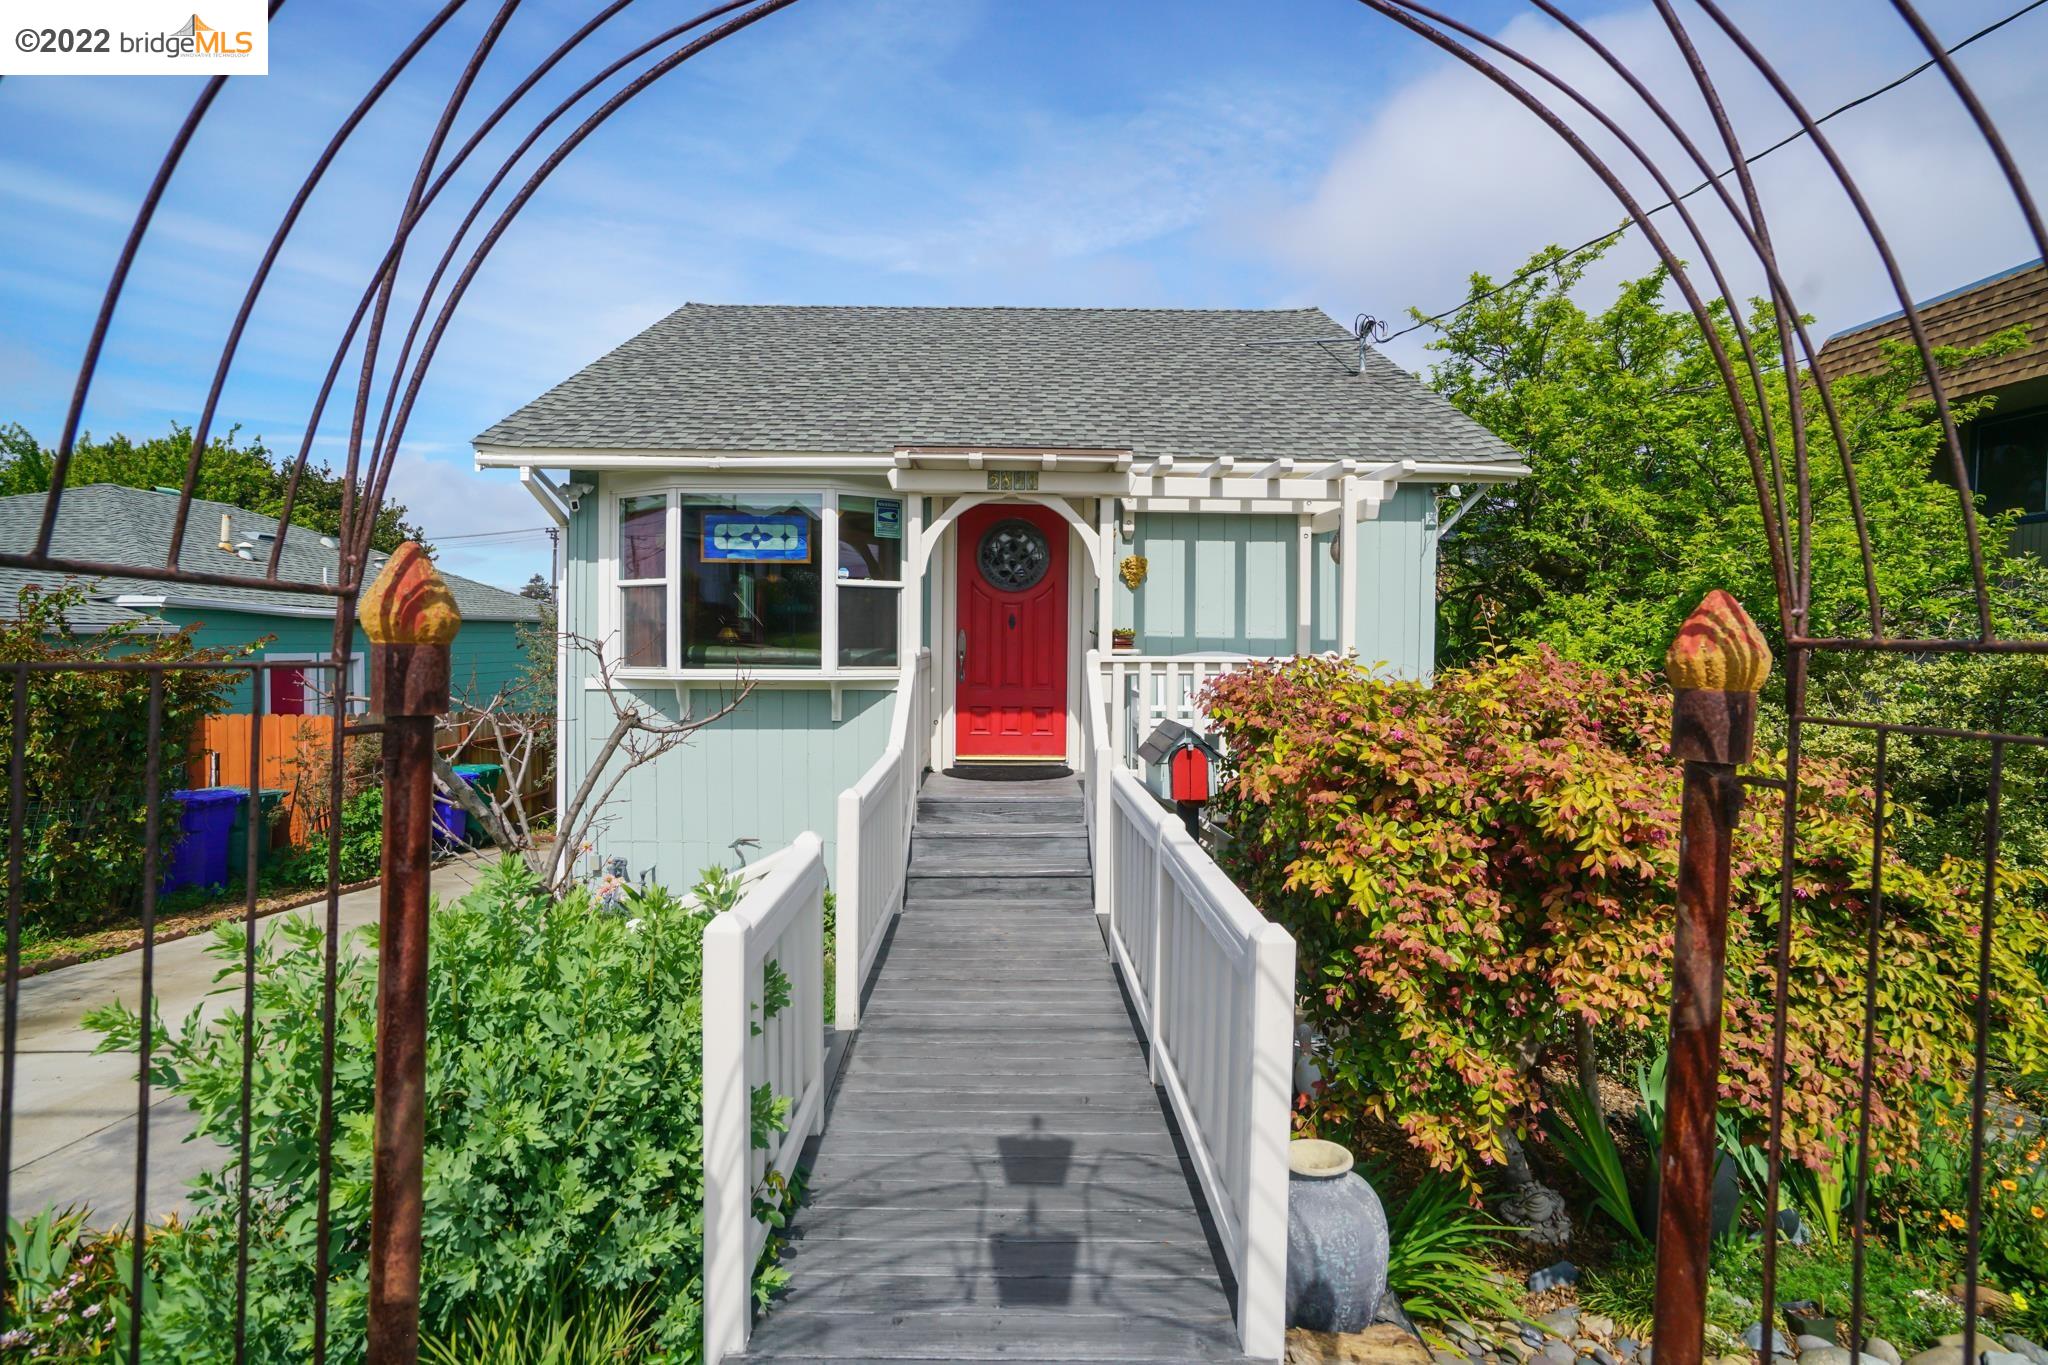 Photo of 5843 Bayview Ave in Richmond, CA